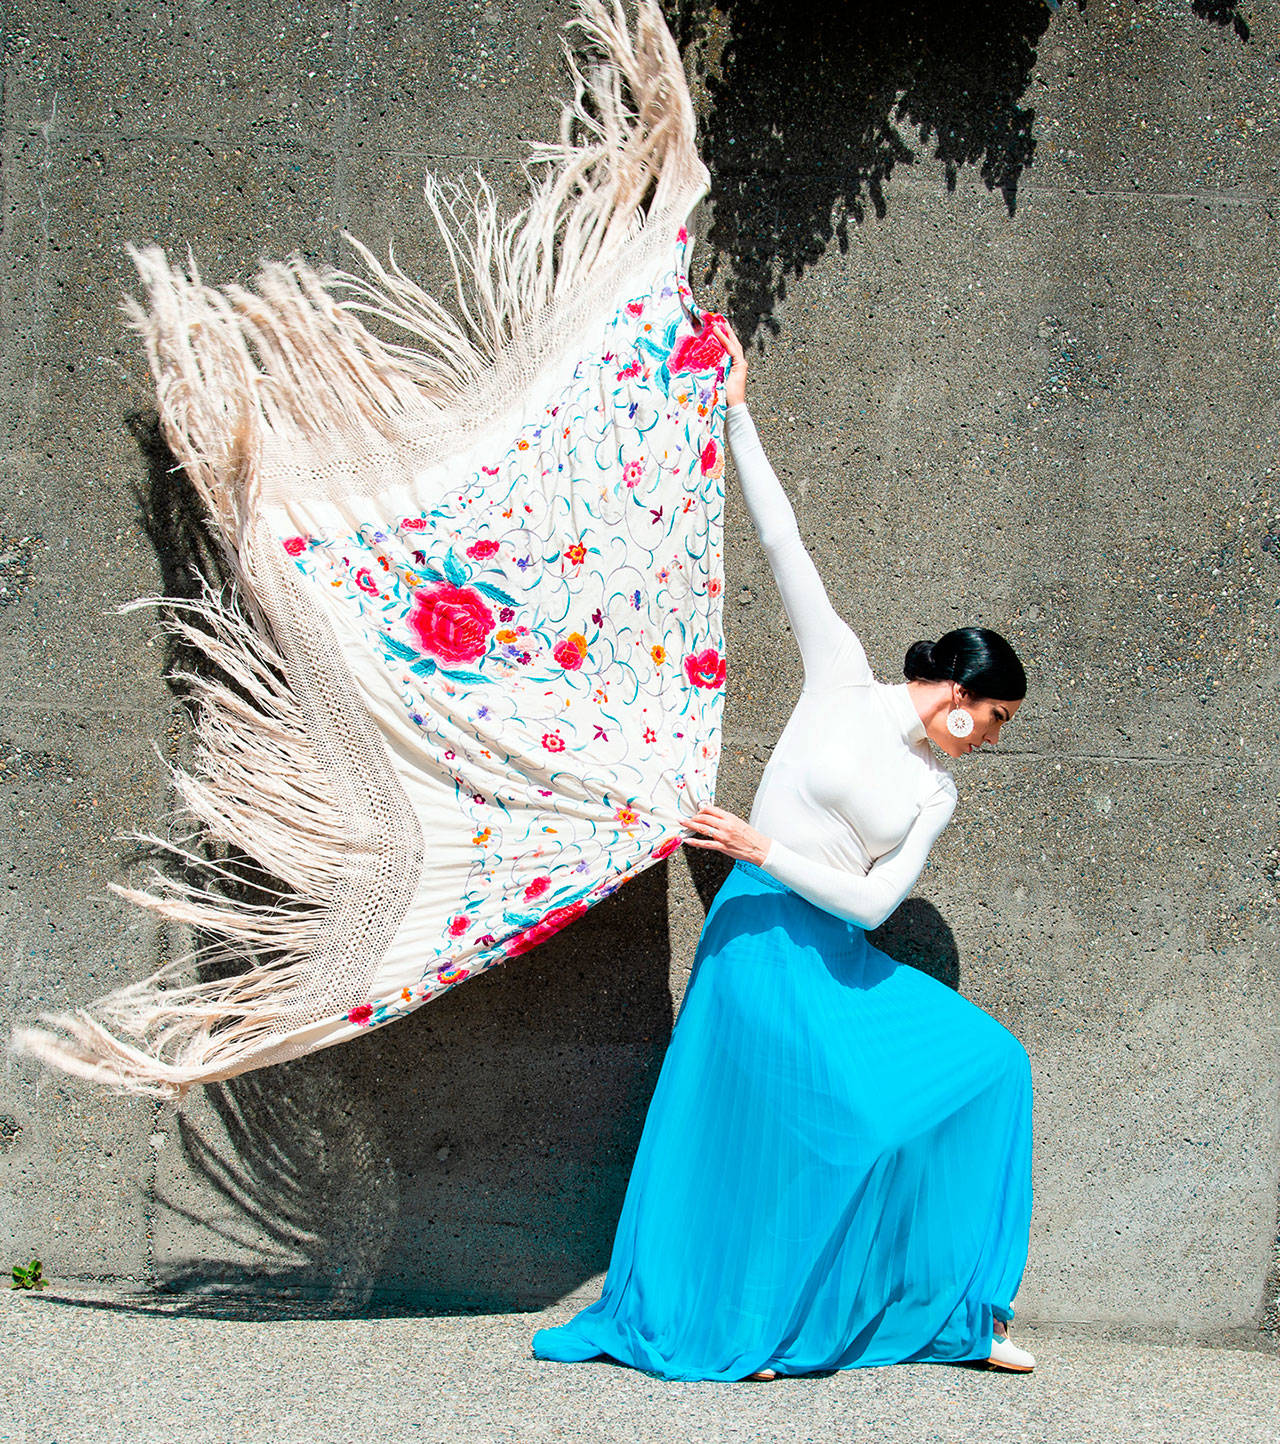 Seattle-based flamenco artist Savannah Fuentes brings her art form back to Port Townsend this Sunday and Tuesday and to Sequim on Wednesday night. (Photo courtesy of Savannah Fuentes)